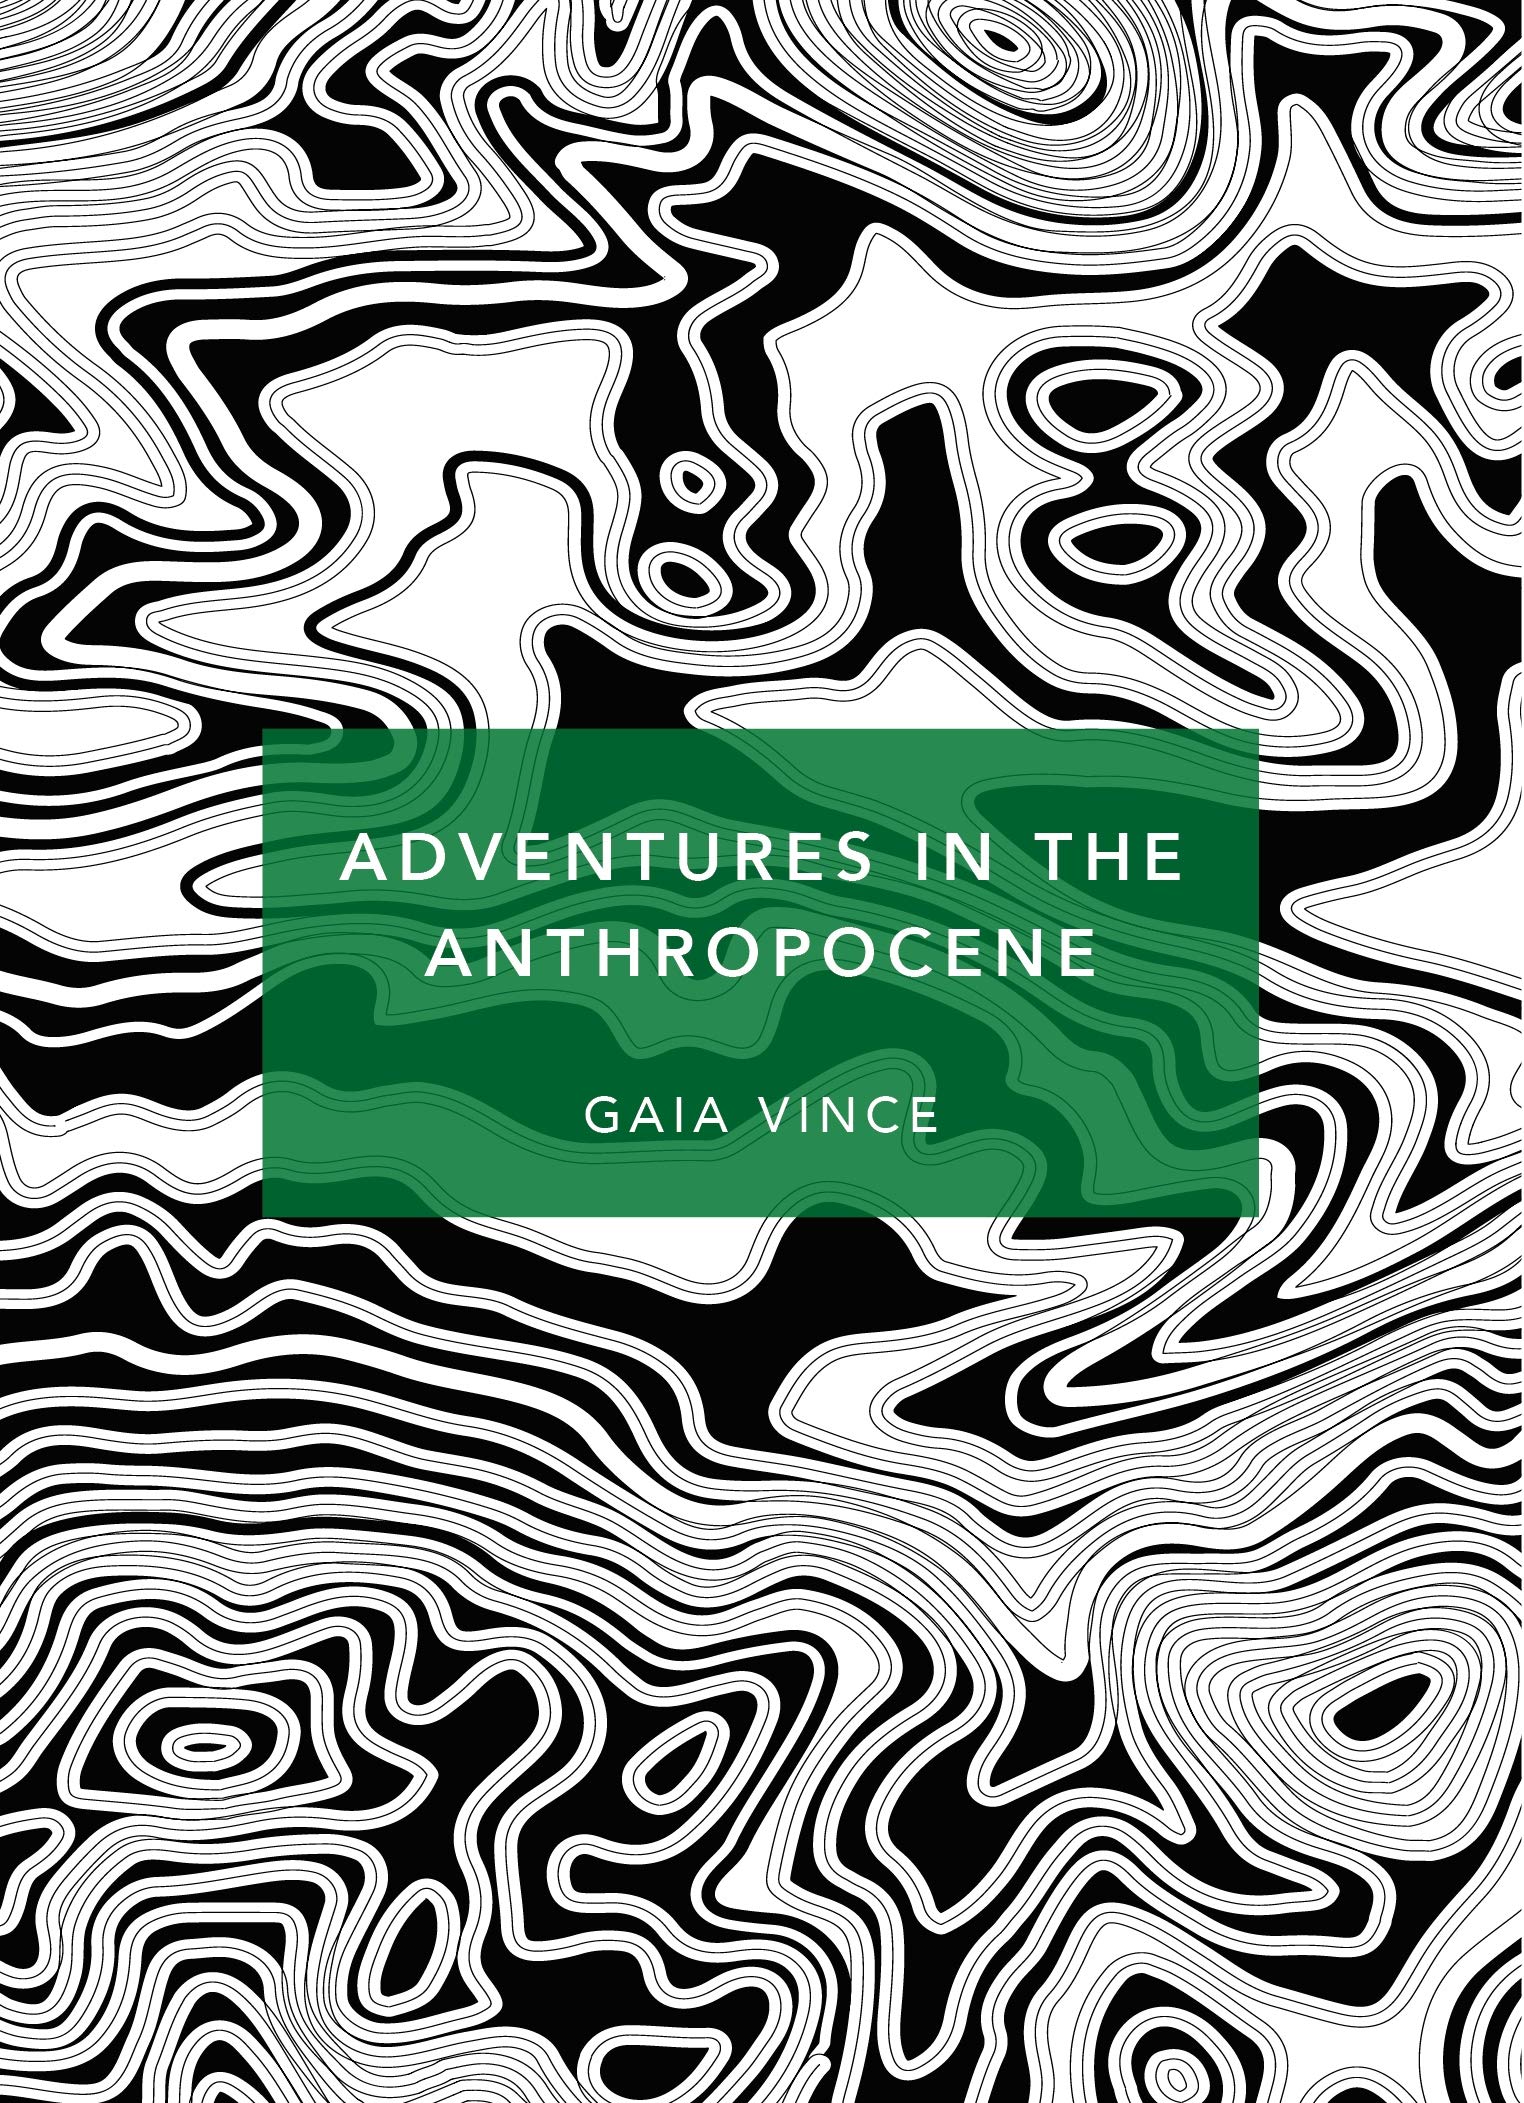 Adventures in the Anthropocene | Gaia Vince